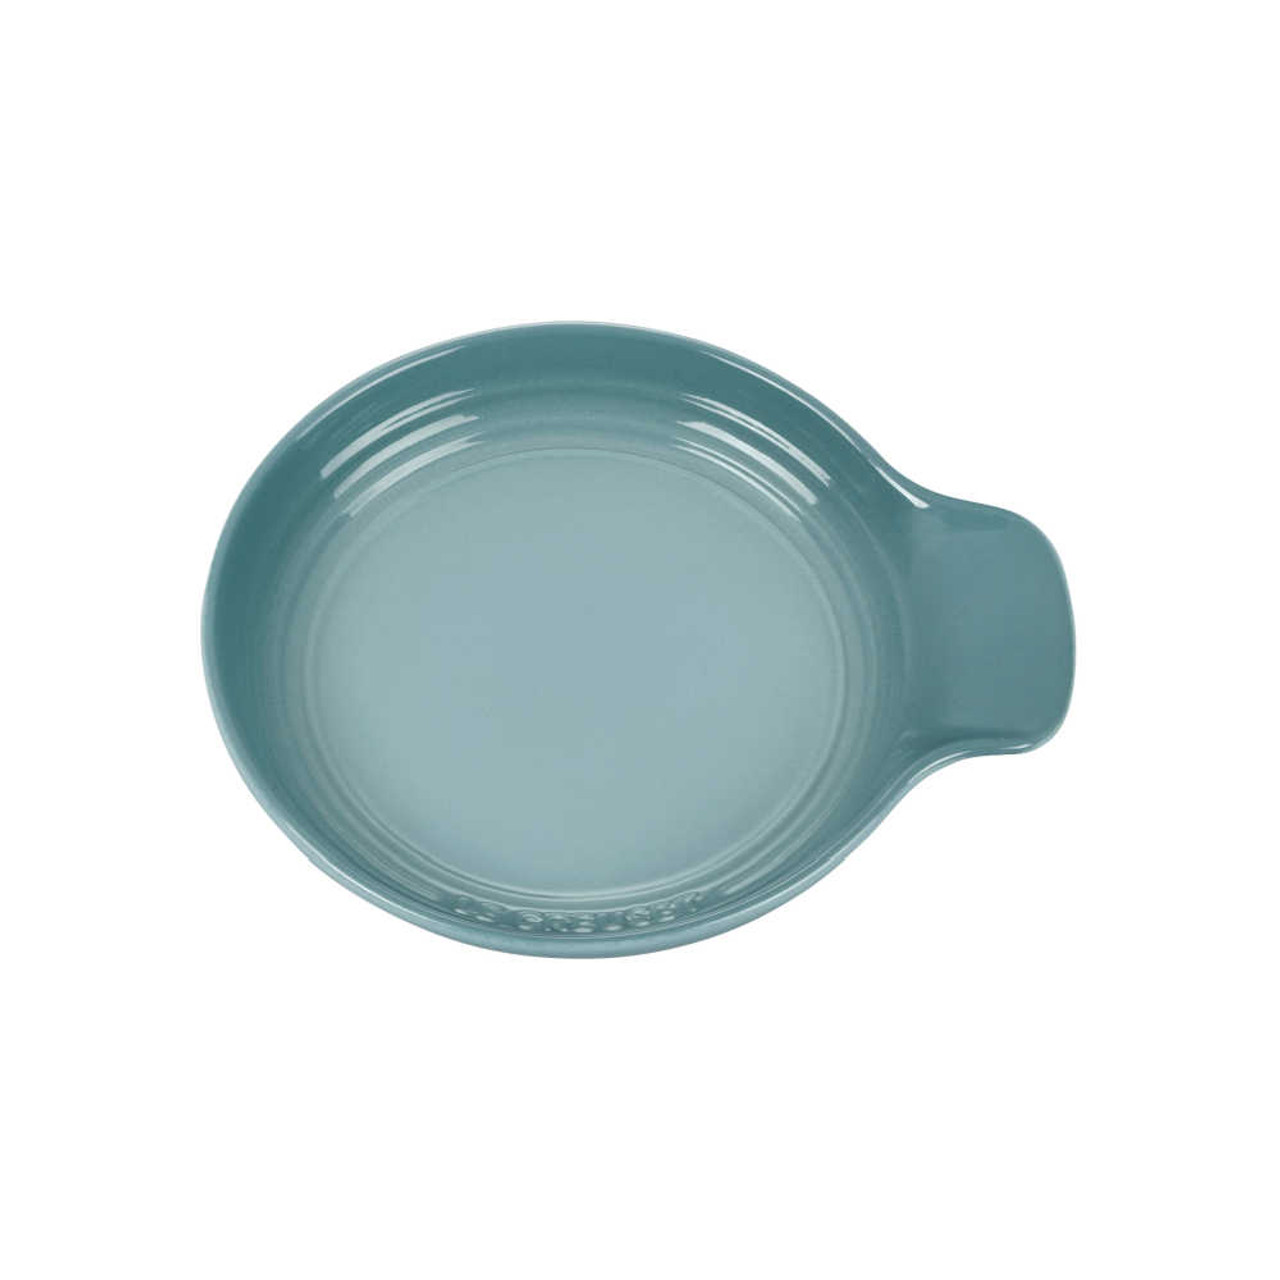 https://cdn11.bigcommerce.com/s-hccytny0od/images/stencil/1280x1280/products/4970/22418/Le_Creuset_Spoon_Rest_in_Sea_Salt_1__90927.1670518375.jpg?c=2?imbypass=on